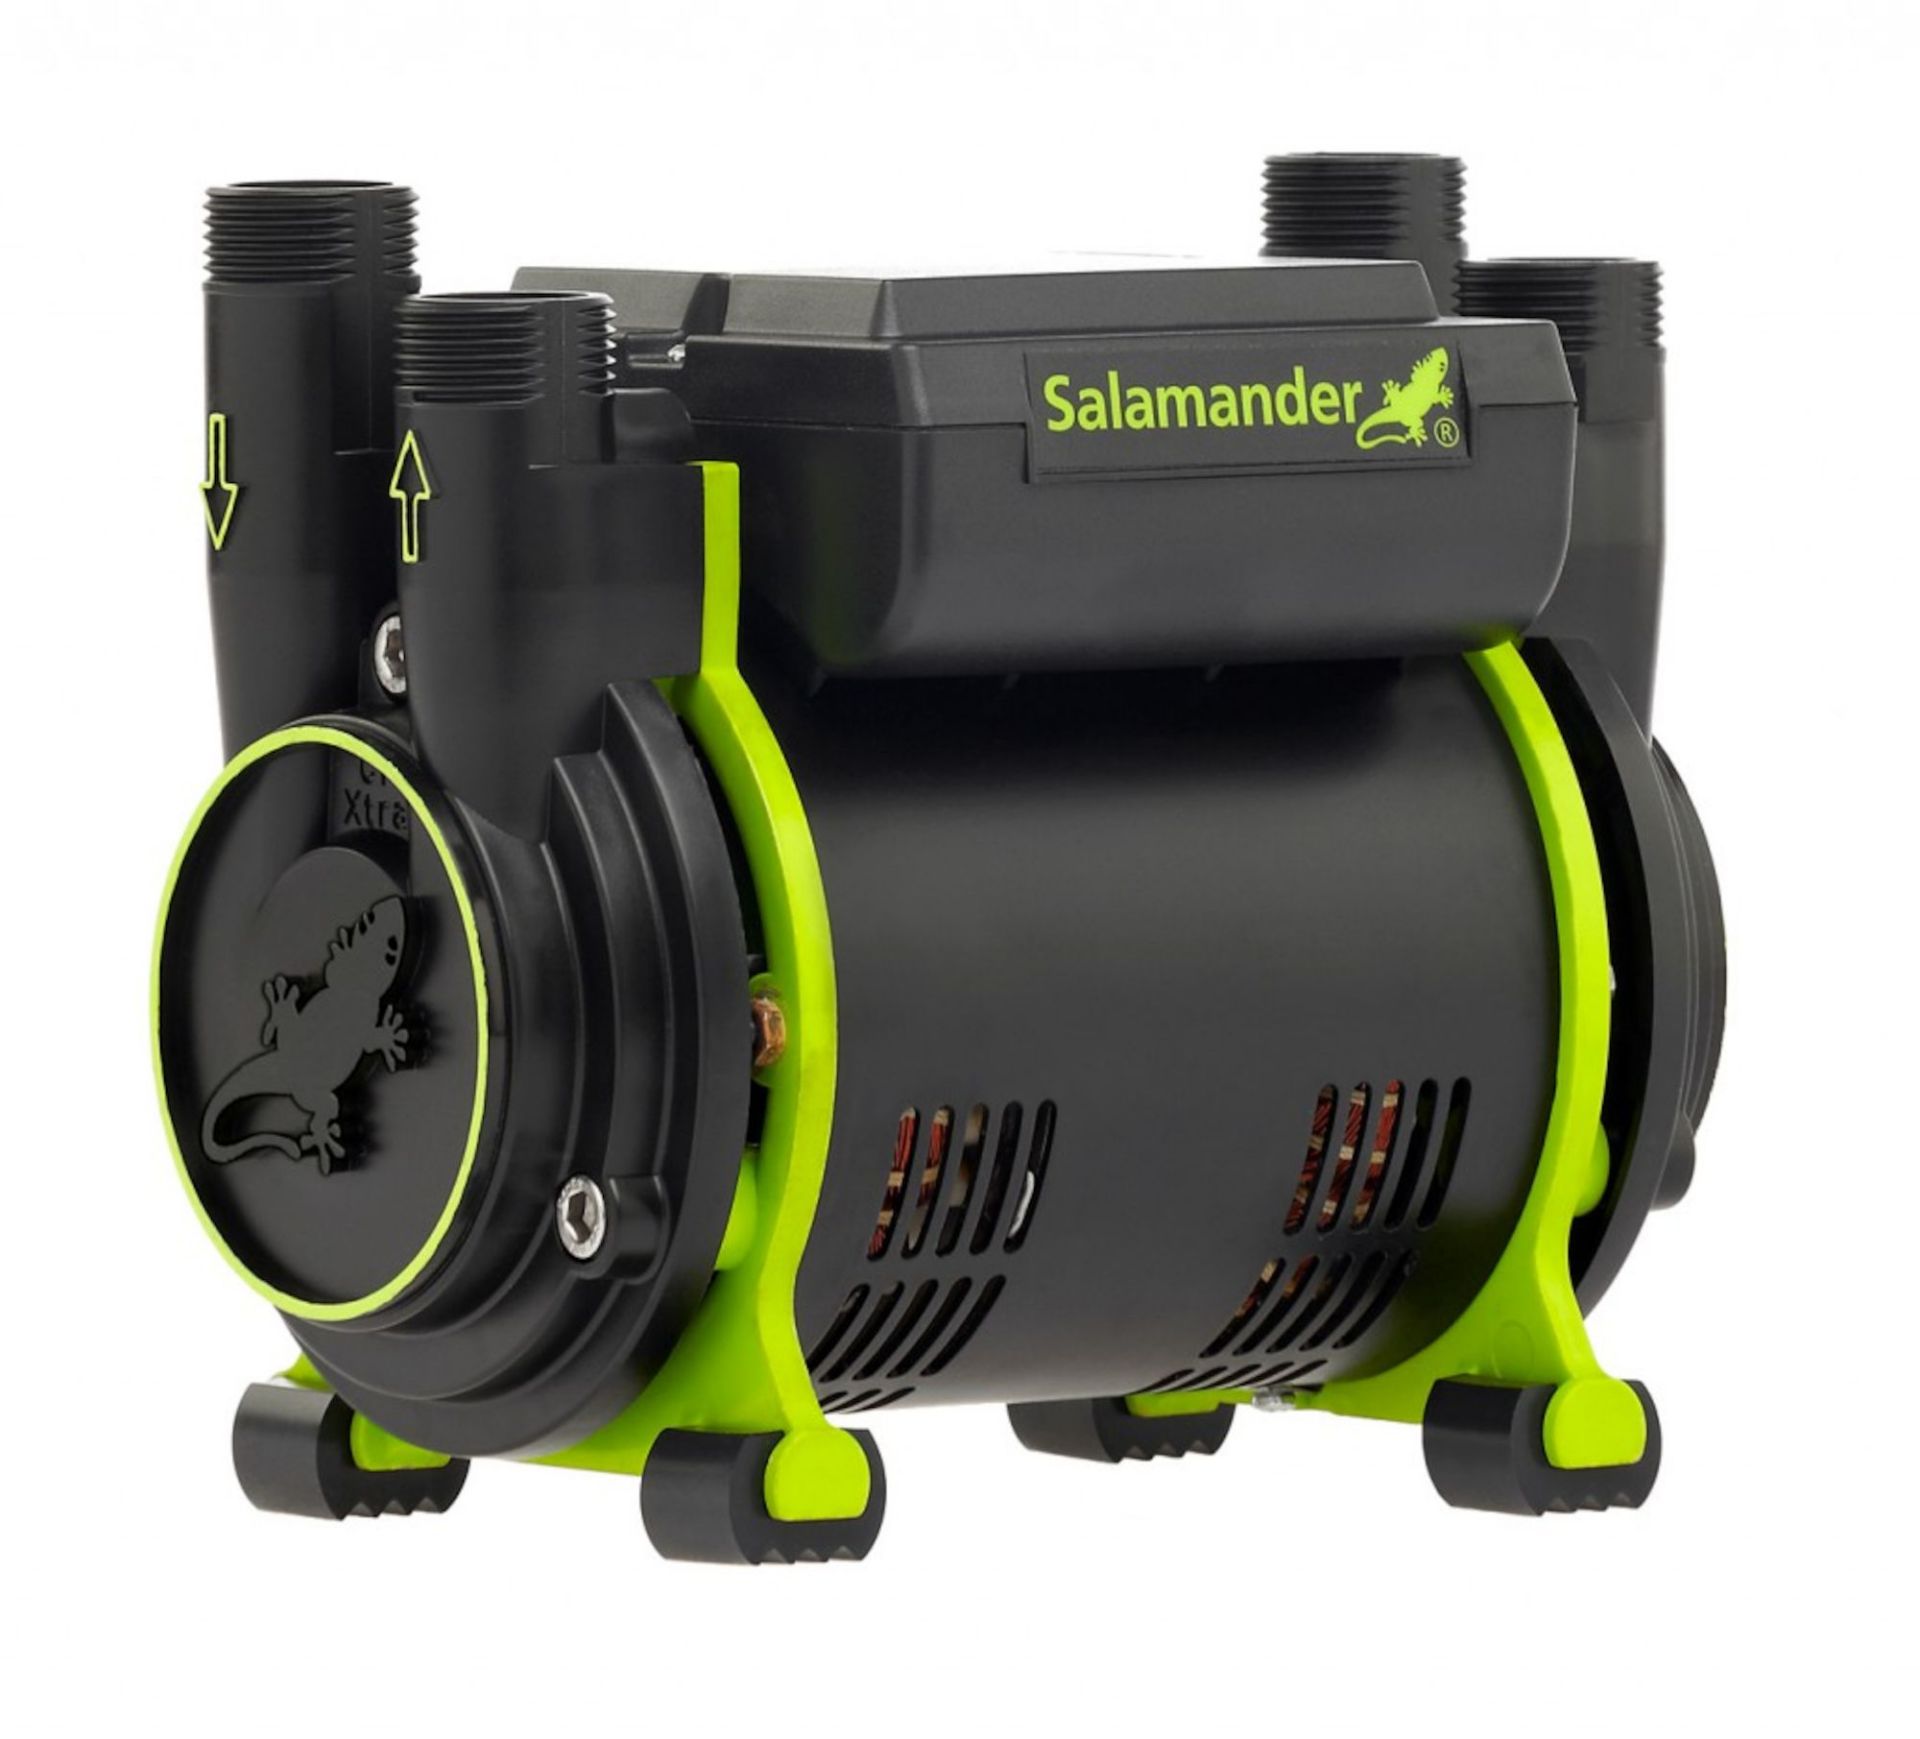 (OS30) Salamander CT 50 Xtra - 1.5 Bar Twin Shower Pump. Easy to fit twin booster pumps 15mm AV